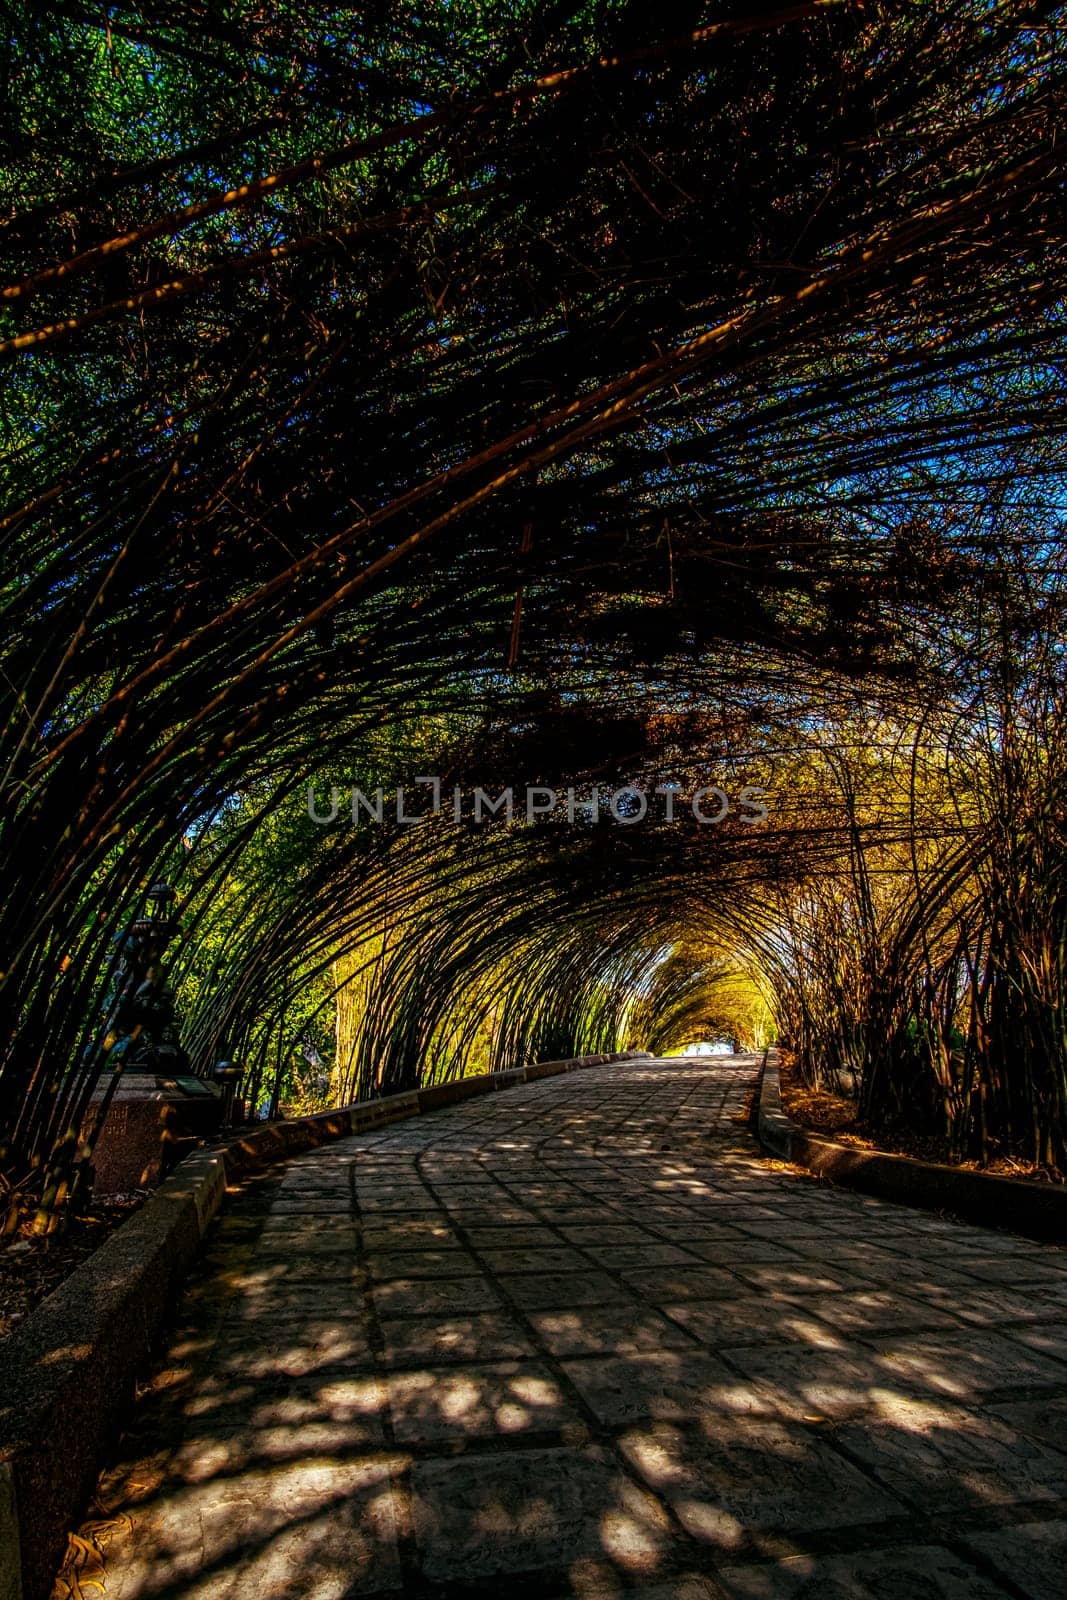 Bamboo tunnel and pavement walkway path in nature forest landscape